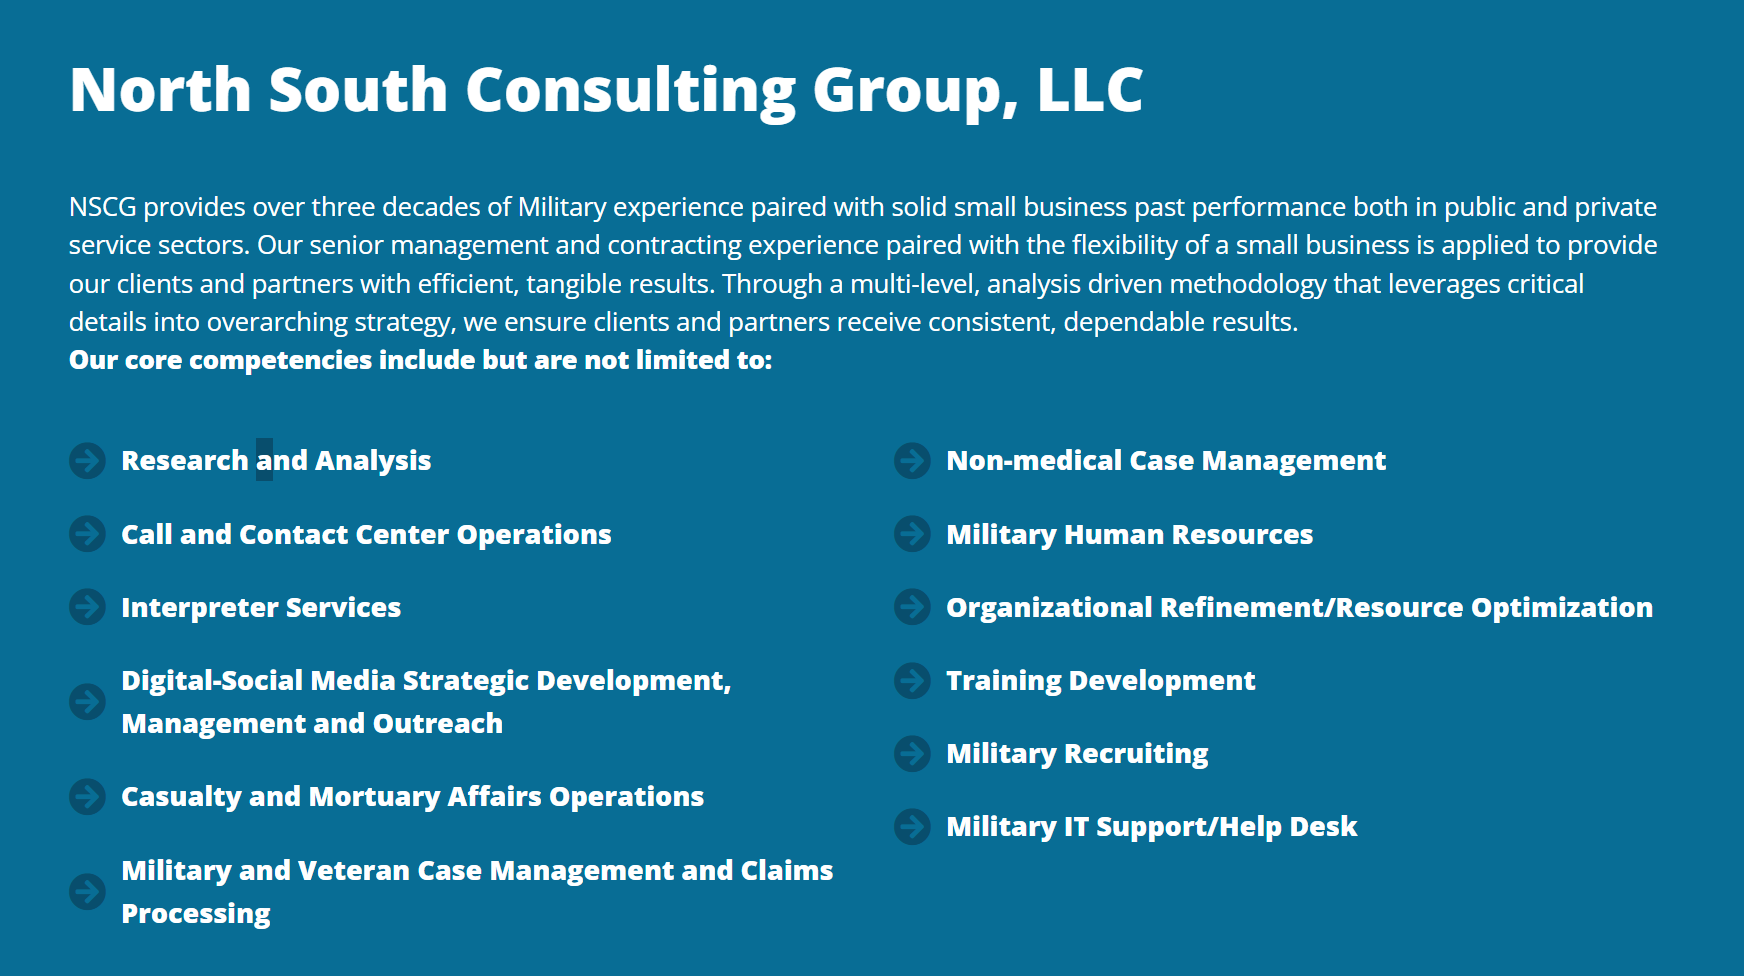 North South Consulting Group product / service